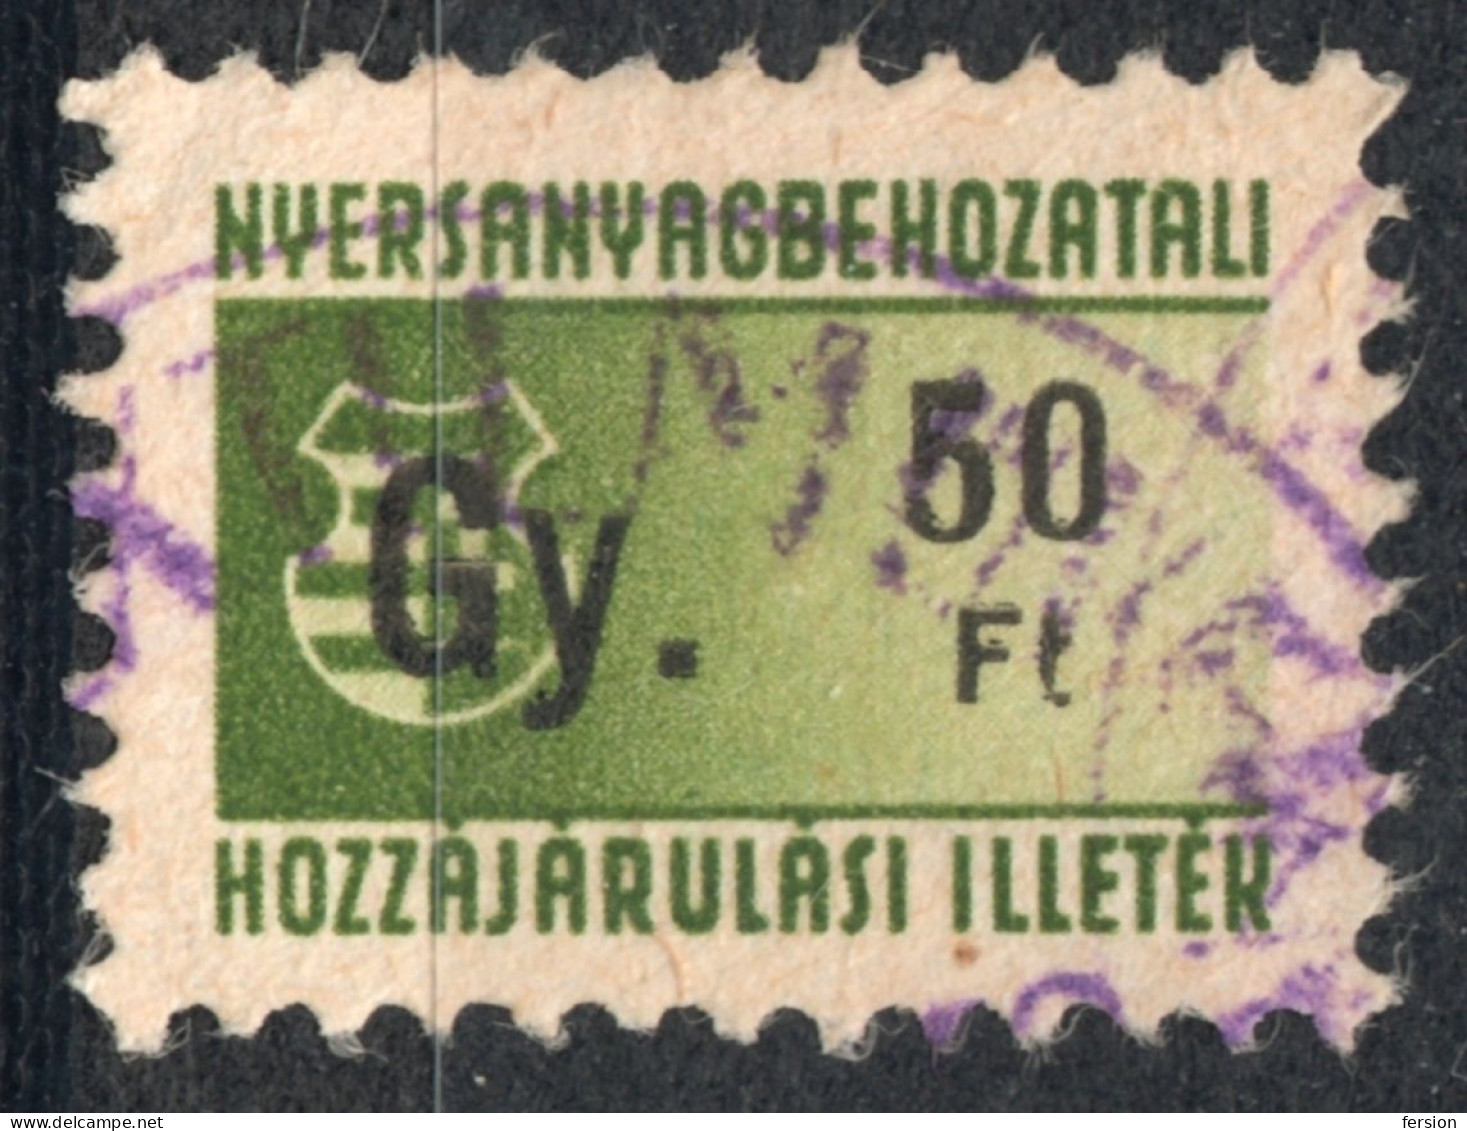 1948 Hungary - Wool Import Tax -  FISCAL BILL - Revenue Stamp - 50 Ft - Used - RR! - KOSSUTH Coat Of Arms - Fiscaux